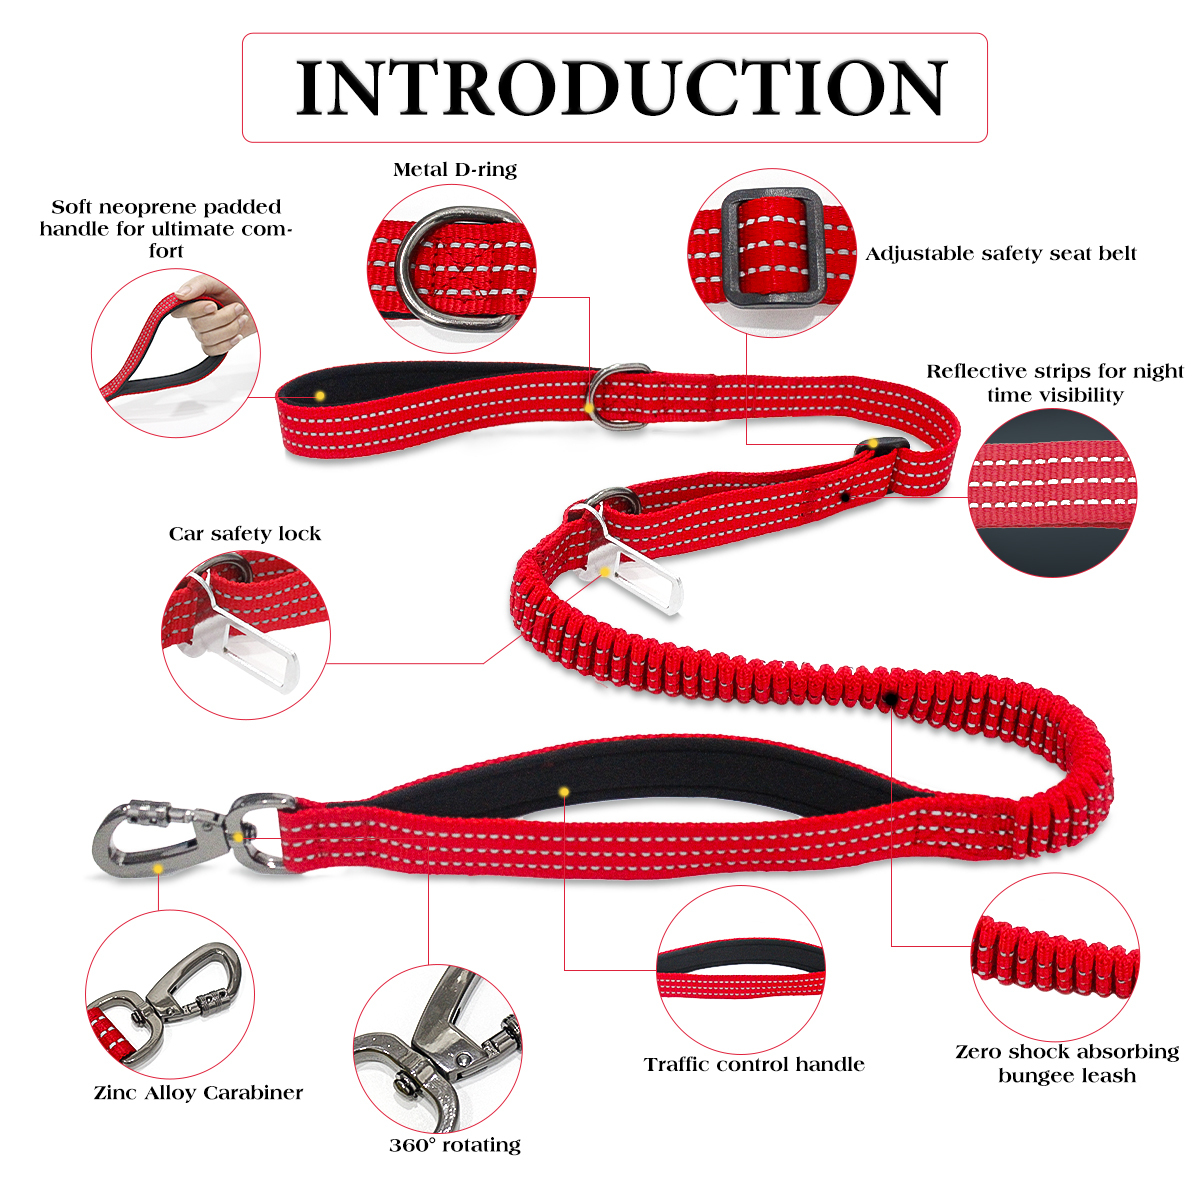 Premium Dog Car Adjustable Safety Seat Belt & Dog Leash, Nylon Elastic, Padded Handle Bungee, With Metal Hook & Buckle (Red), 1 Piece